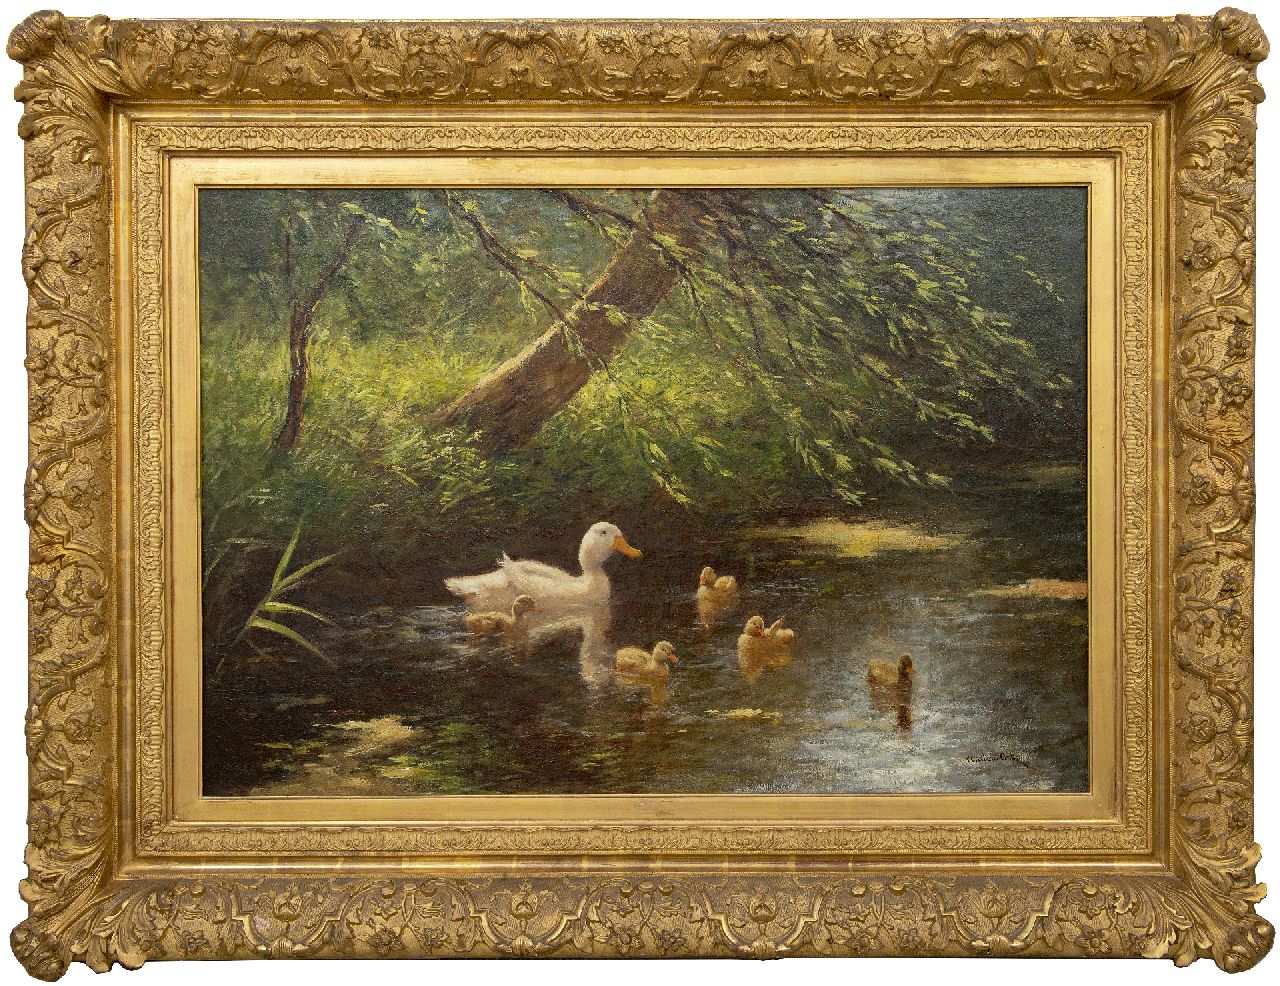 Artz C.D.L.  | 'Constant' David Ludovic Artz | Paintings offered for sale | Duck with ducklings in a ditch, oil on canvas 65.4 x 95.4 cm, signed l.r.